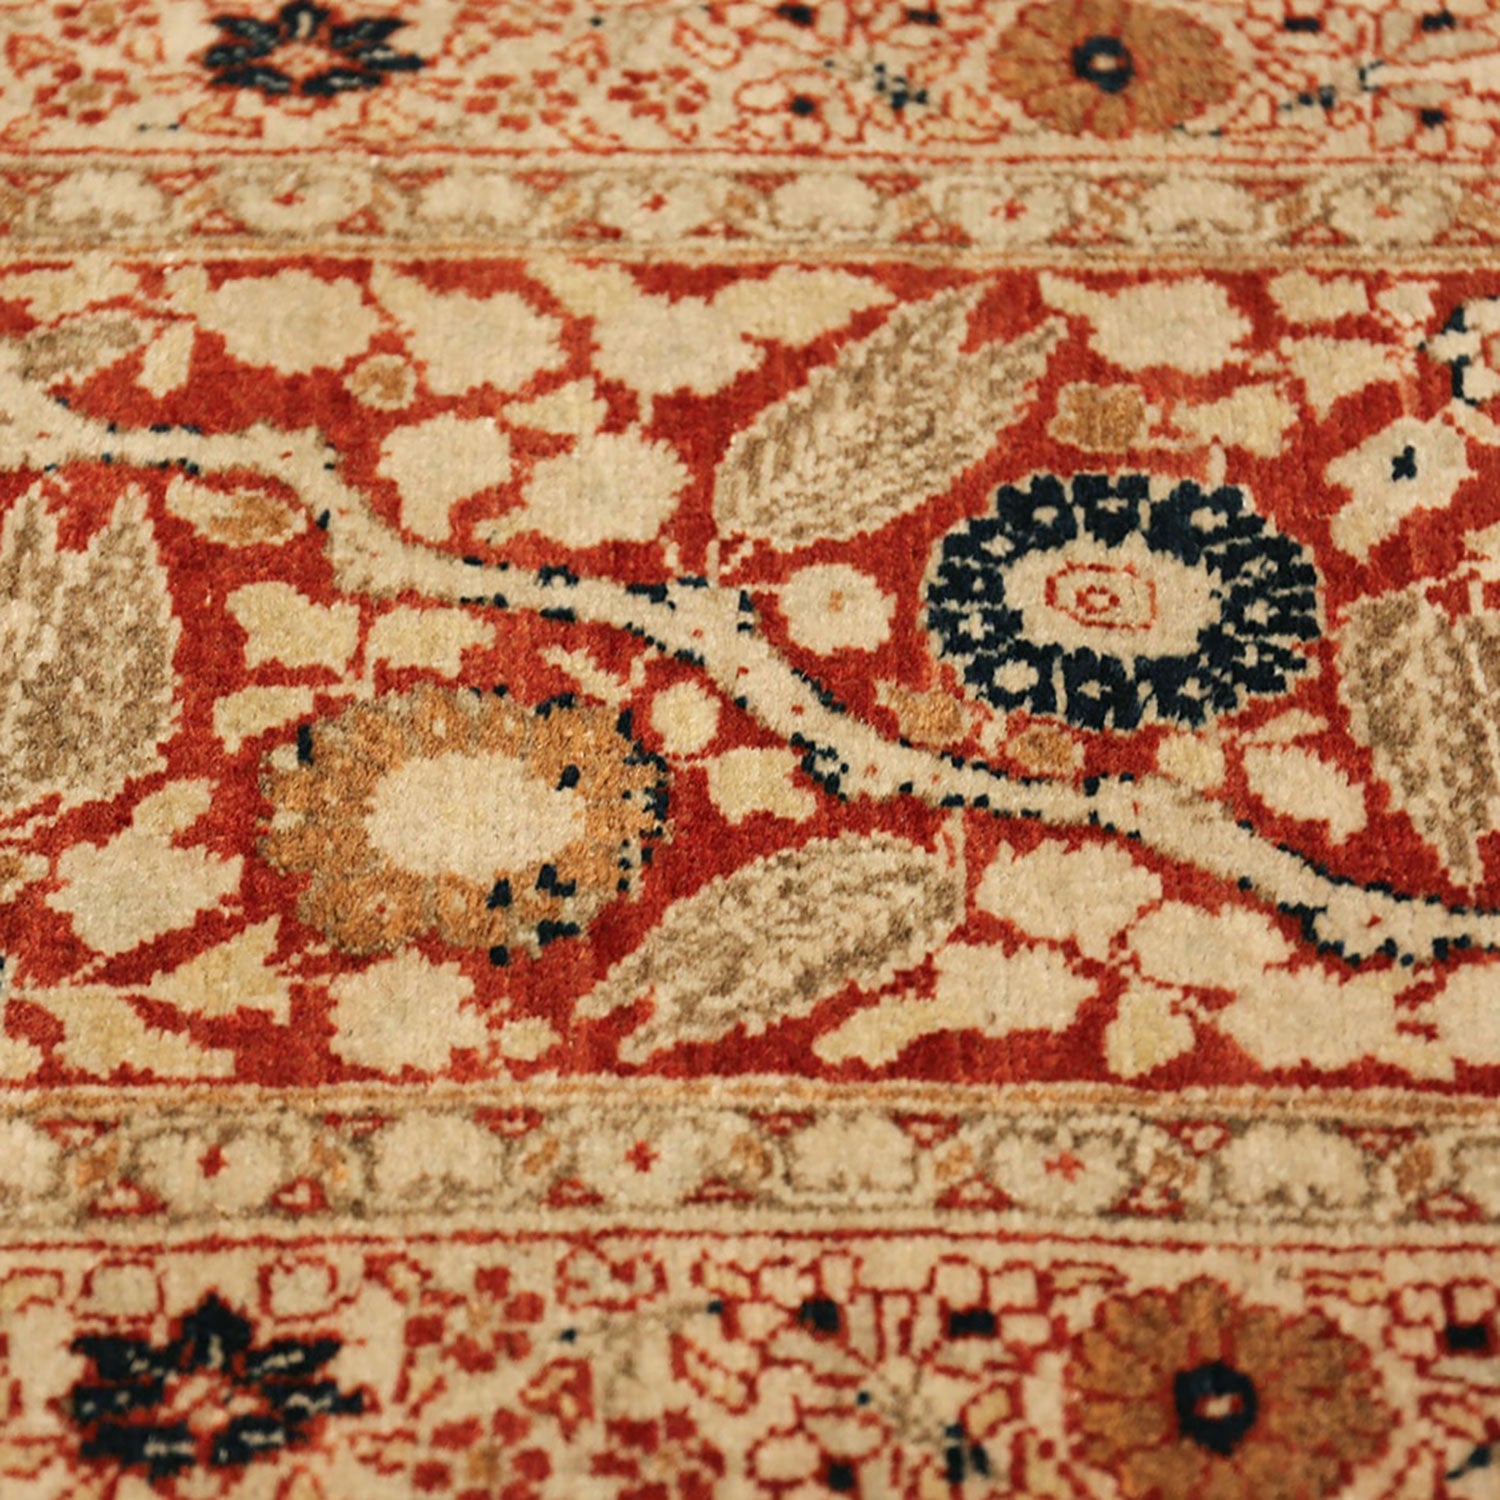 Faded red, beige, and black carpet with intricate floral design.